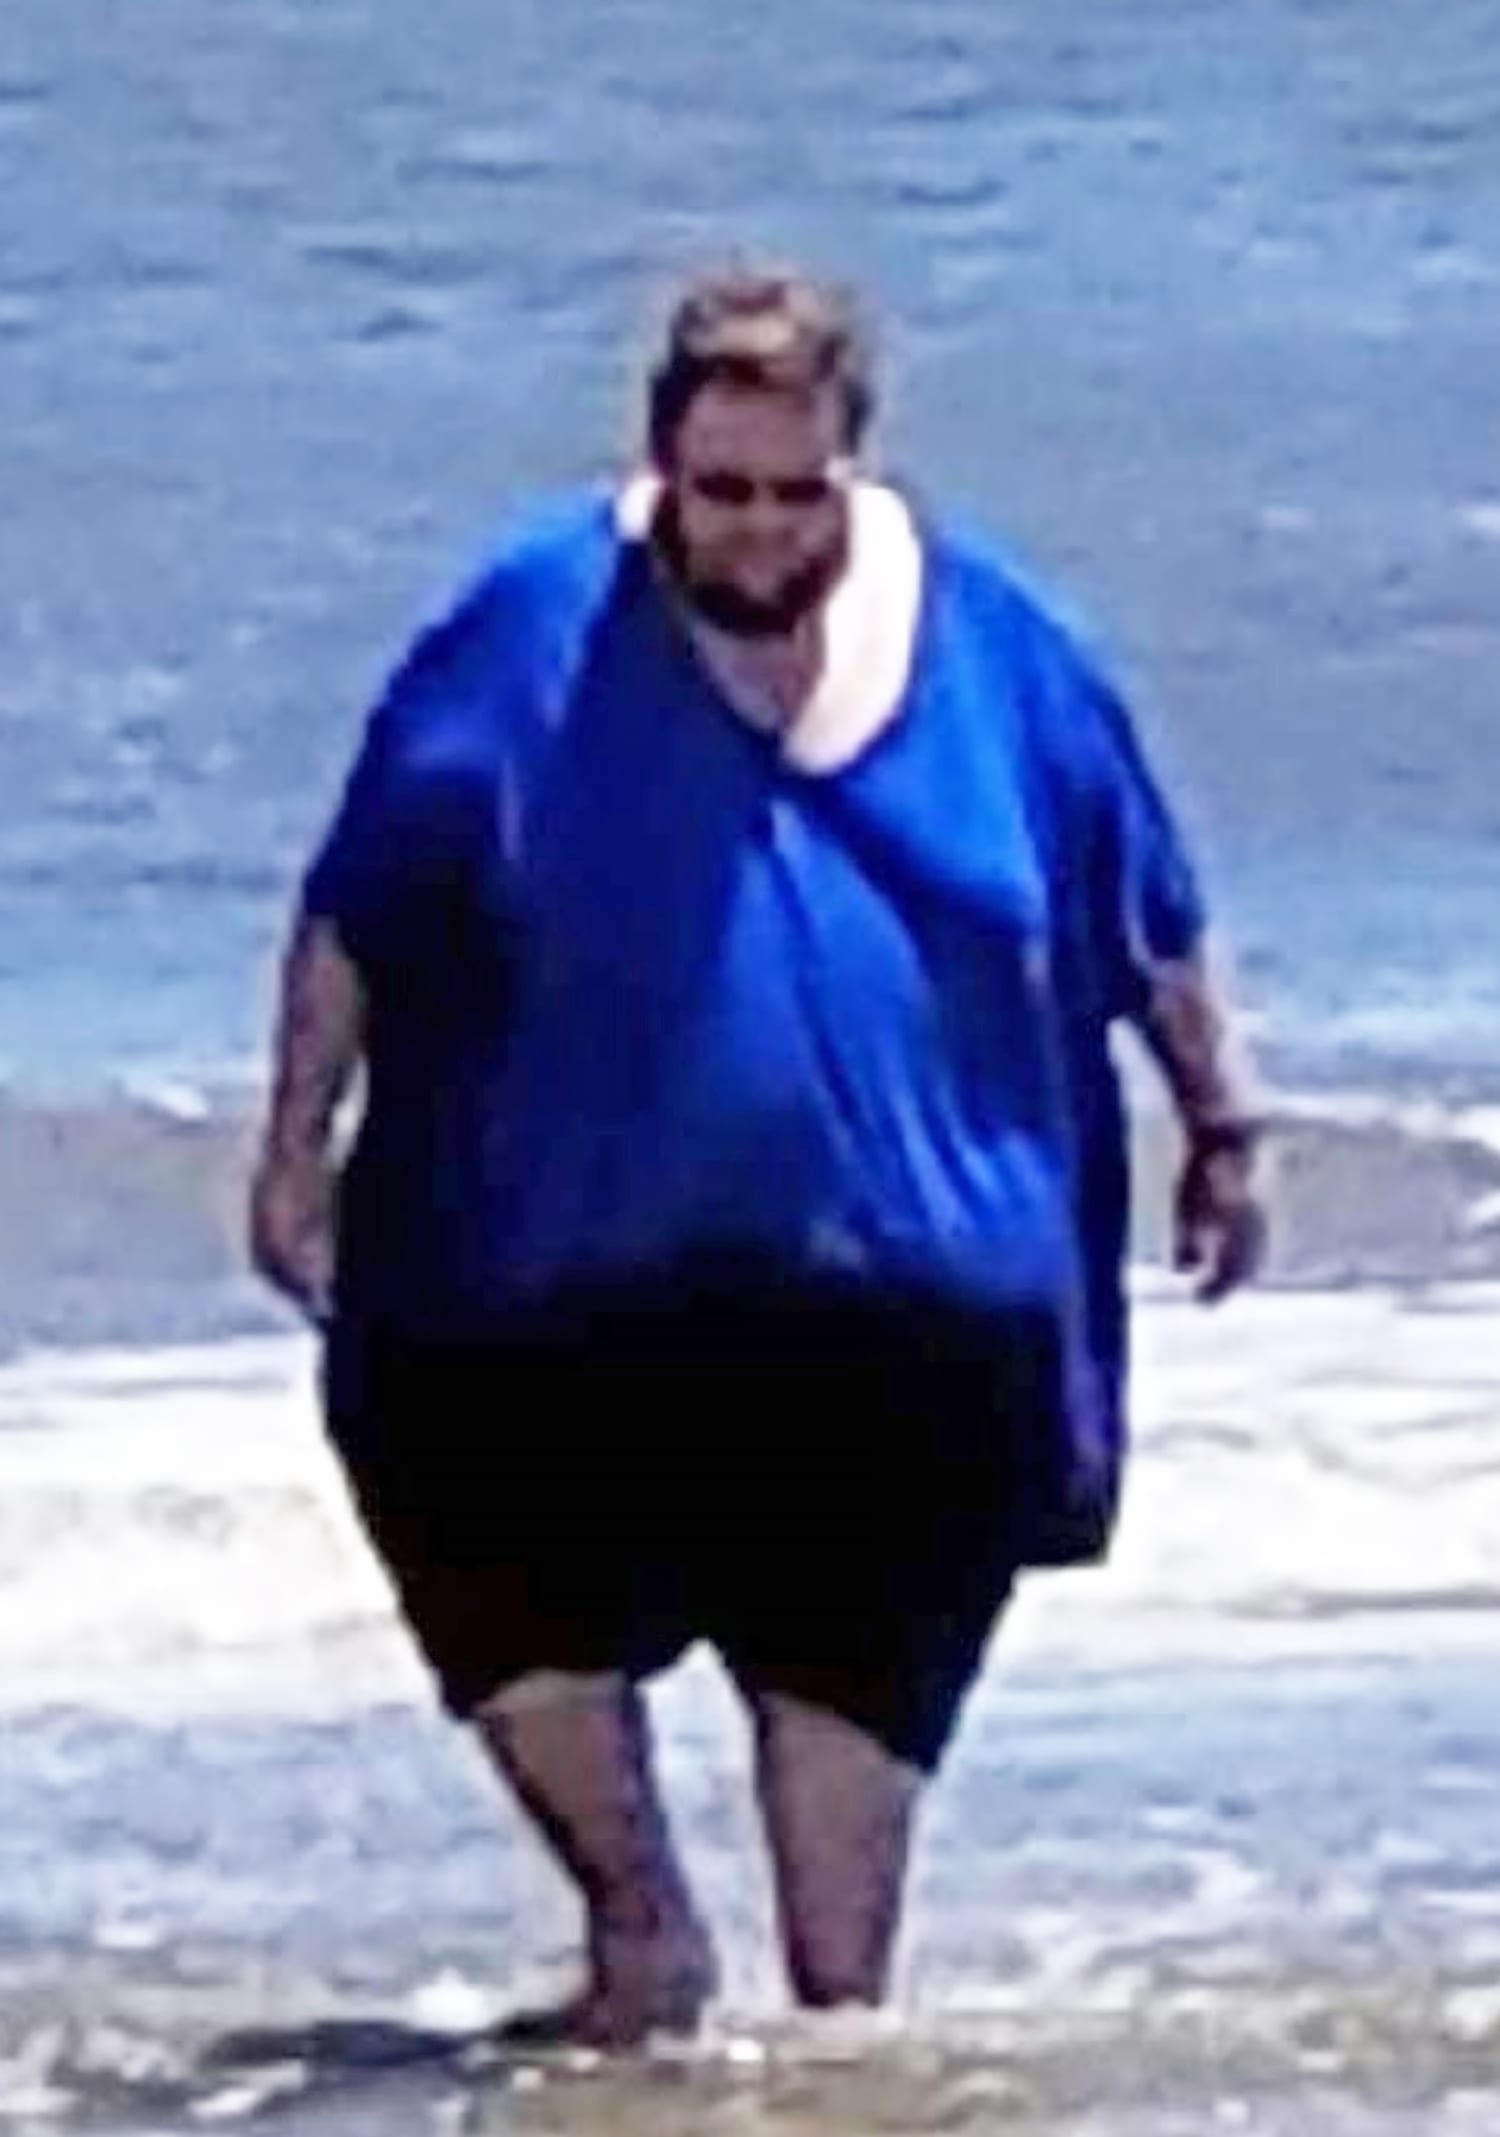 Man Loses 360 Pounds By Walking, Seeks Help For Loose Skin